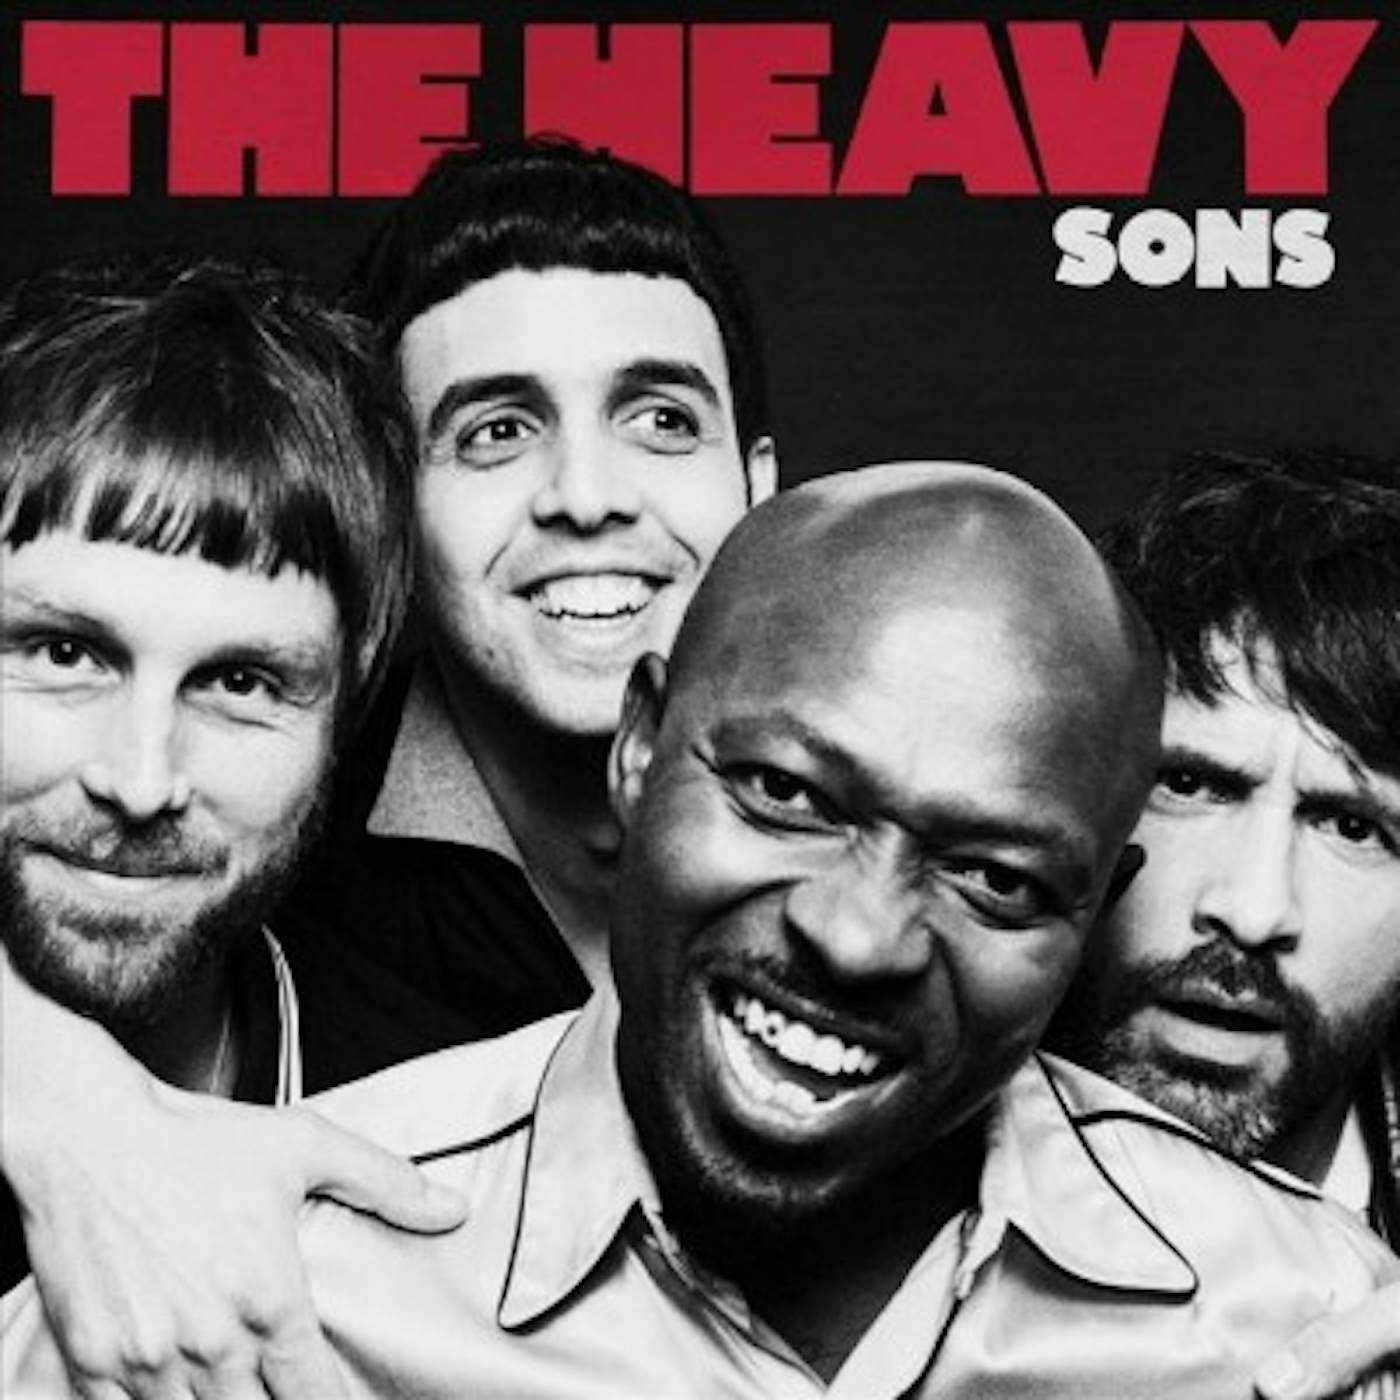 The Heavy Sons CD